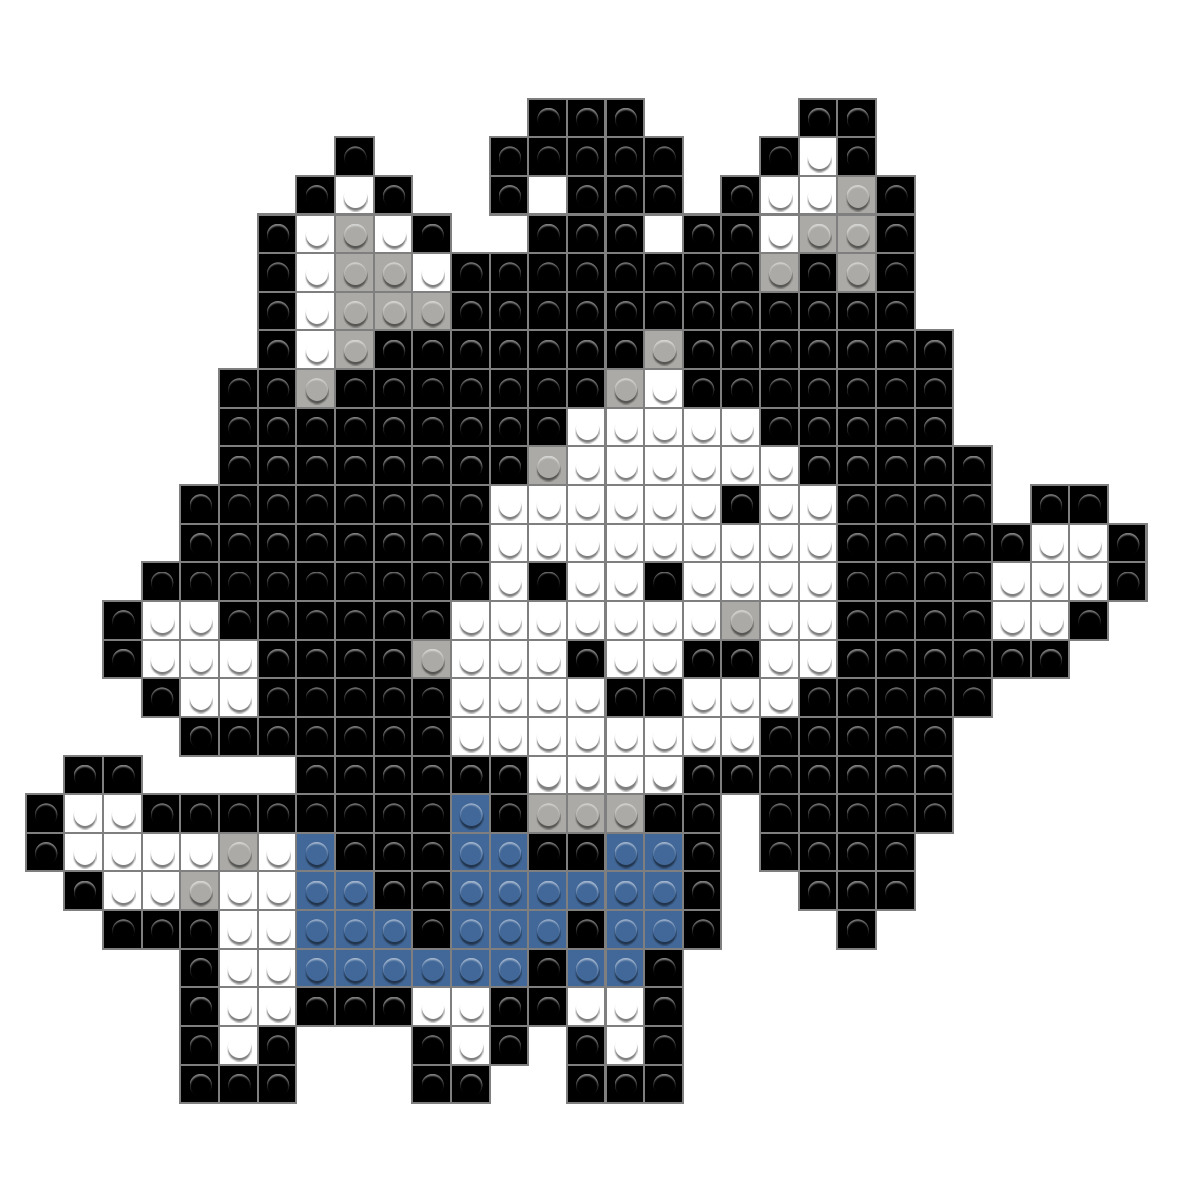 butter cake recommends images of temmie from undertale pic